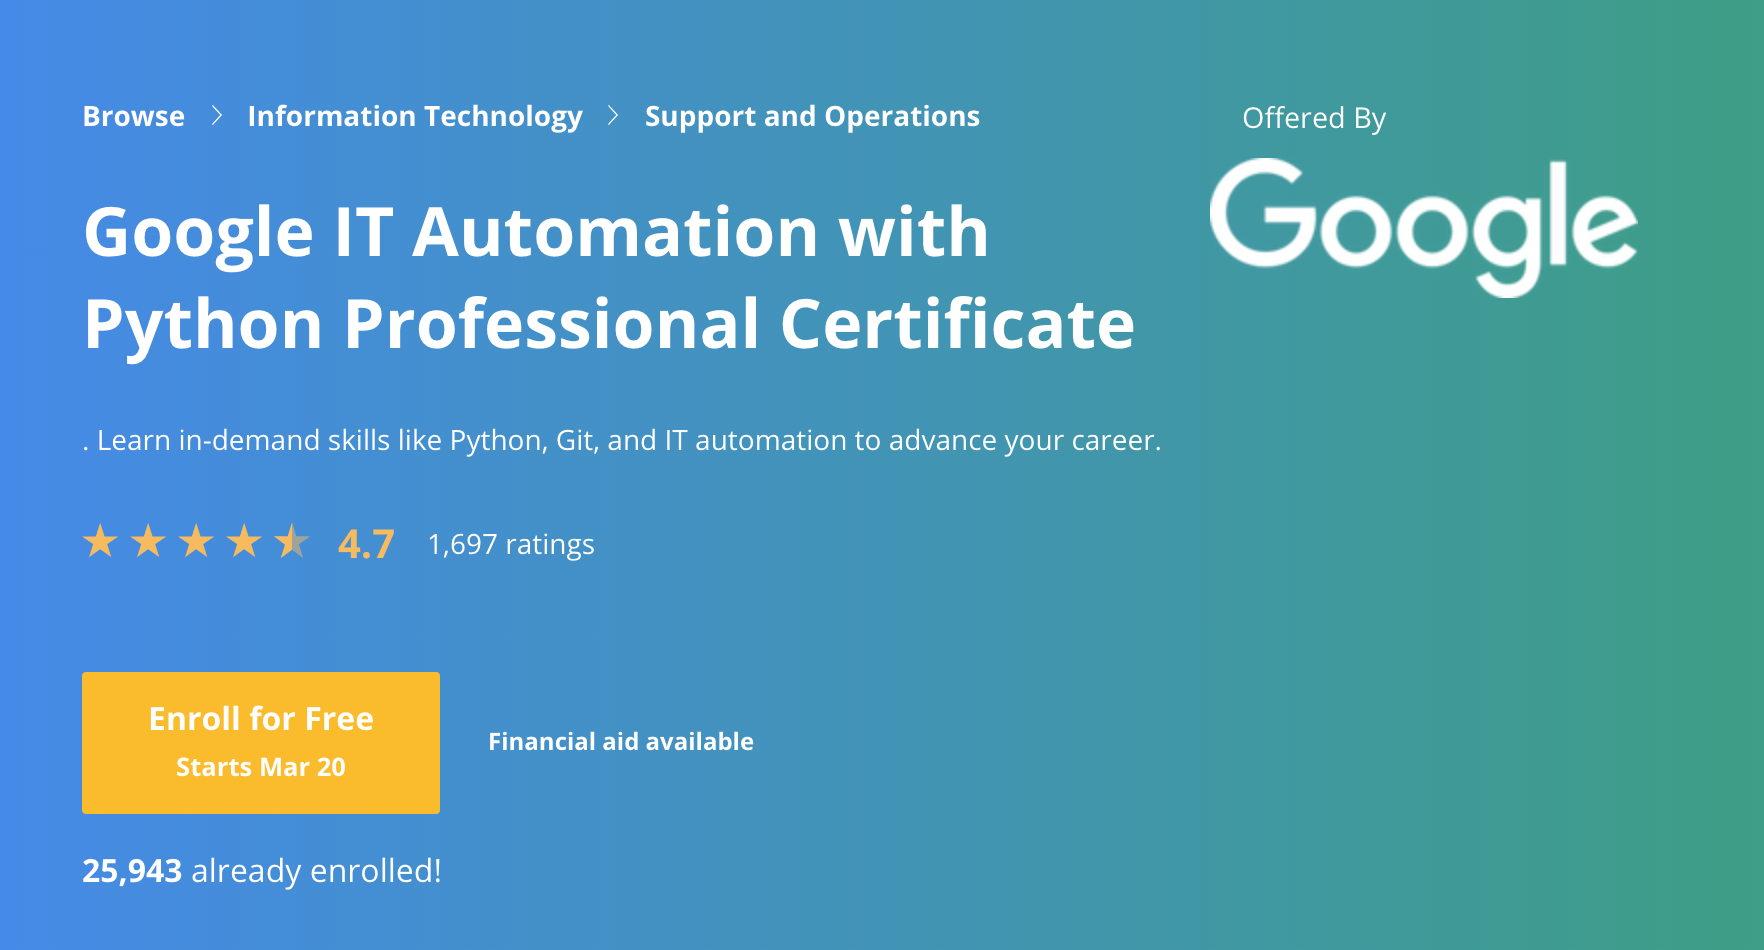 Google IT Automation with Python Professional Certificate - ASEAN Scholarships